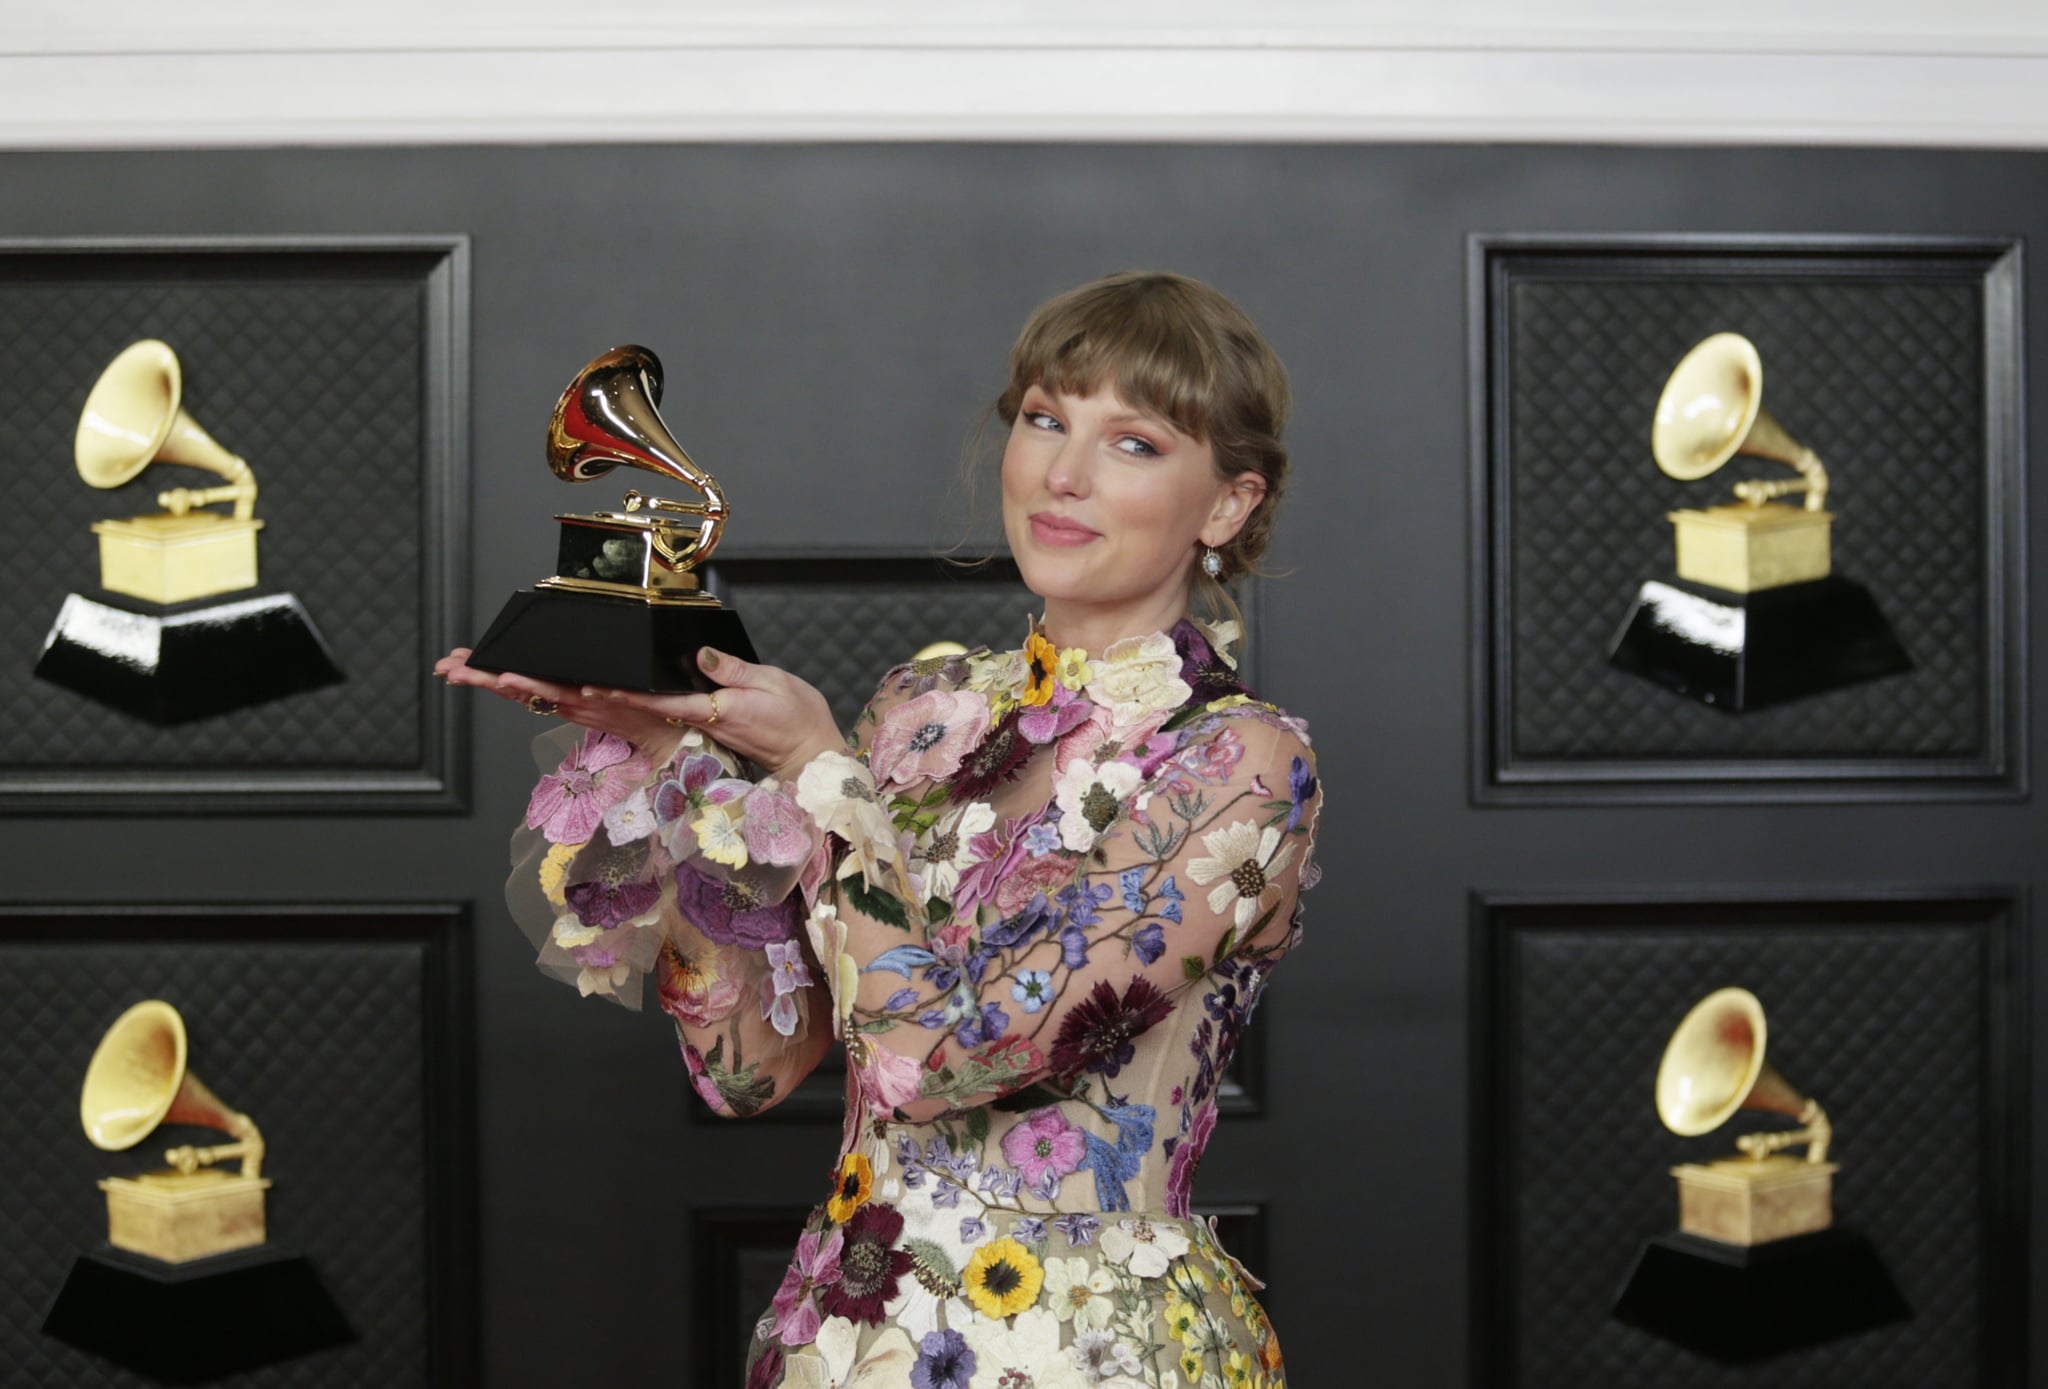 LOS ANGELES - MARCH 14: Taylor Swift at THE 63rd ANNUAL GRAMMY® AWARDS, broadcast live from the STAPLES Center in Los Angeles, Sunday, March 14, 2021 (8:00-11:30 PM, live ET/5:00-8:30 PM, live PT) on the CBS Television Network and Paramount+. (Photo by Francis Specker/CBS via Getty Images)